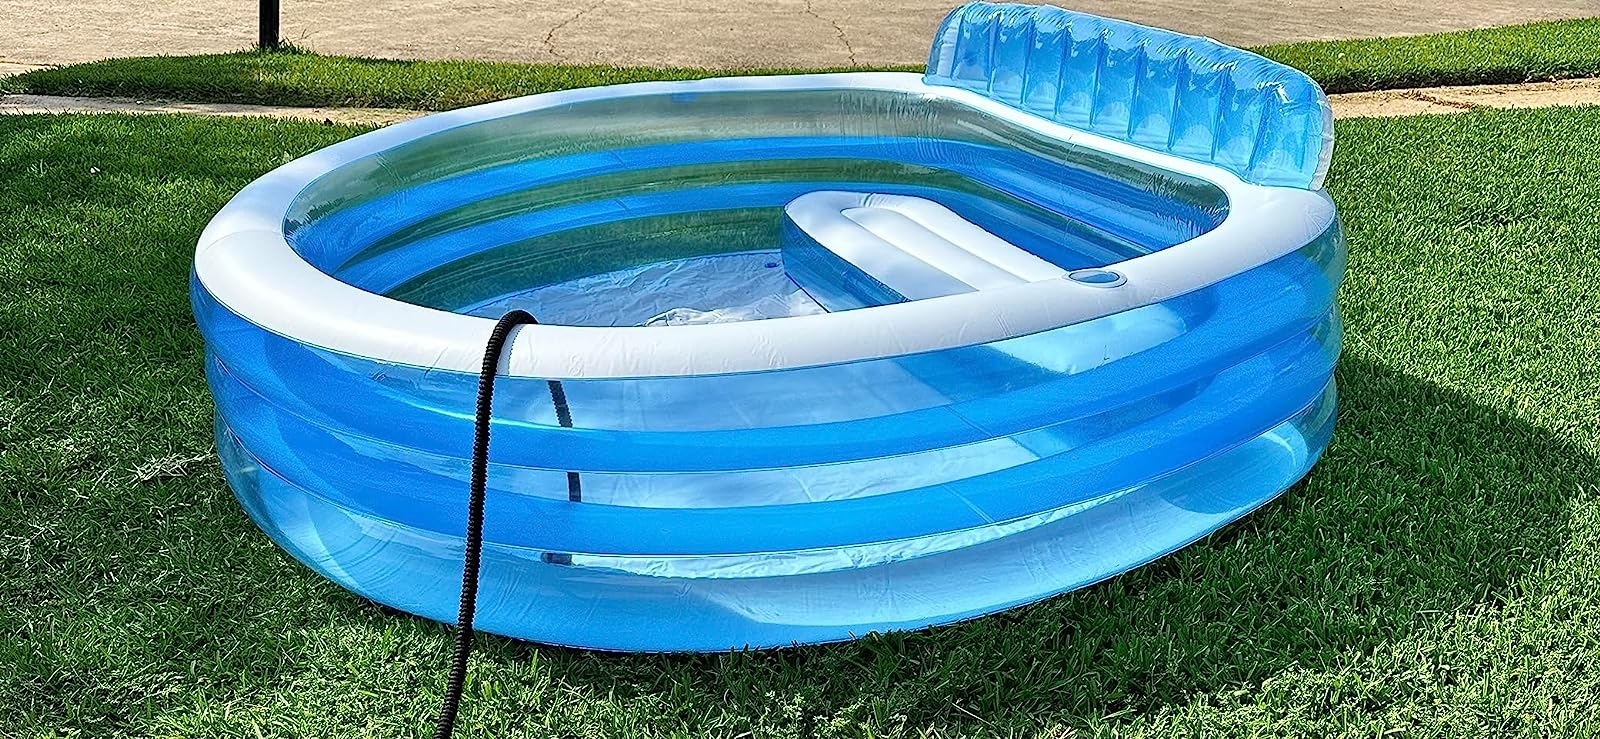 a reviewer photo of the blue and white pool in a backyard with a black hose hanging over the edge